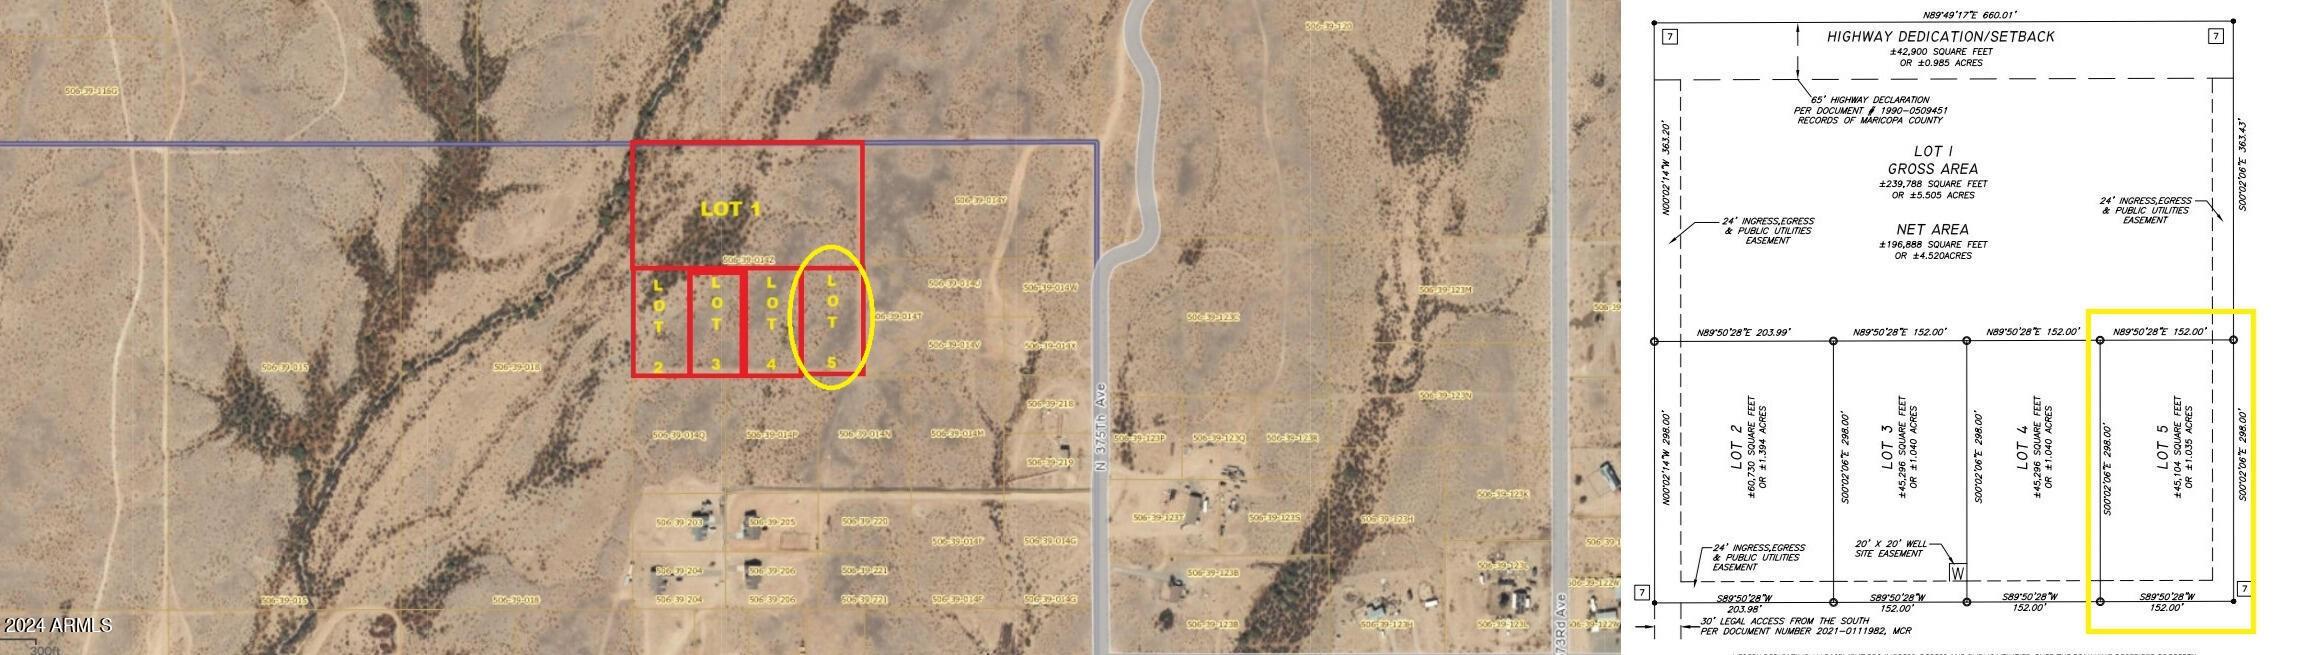 Property Image for 377th Ave & Camelback Road Lot 5